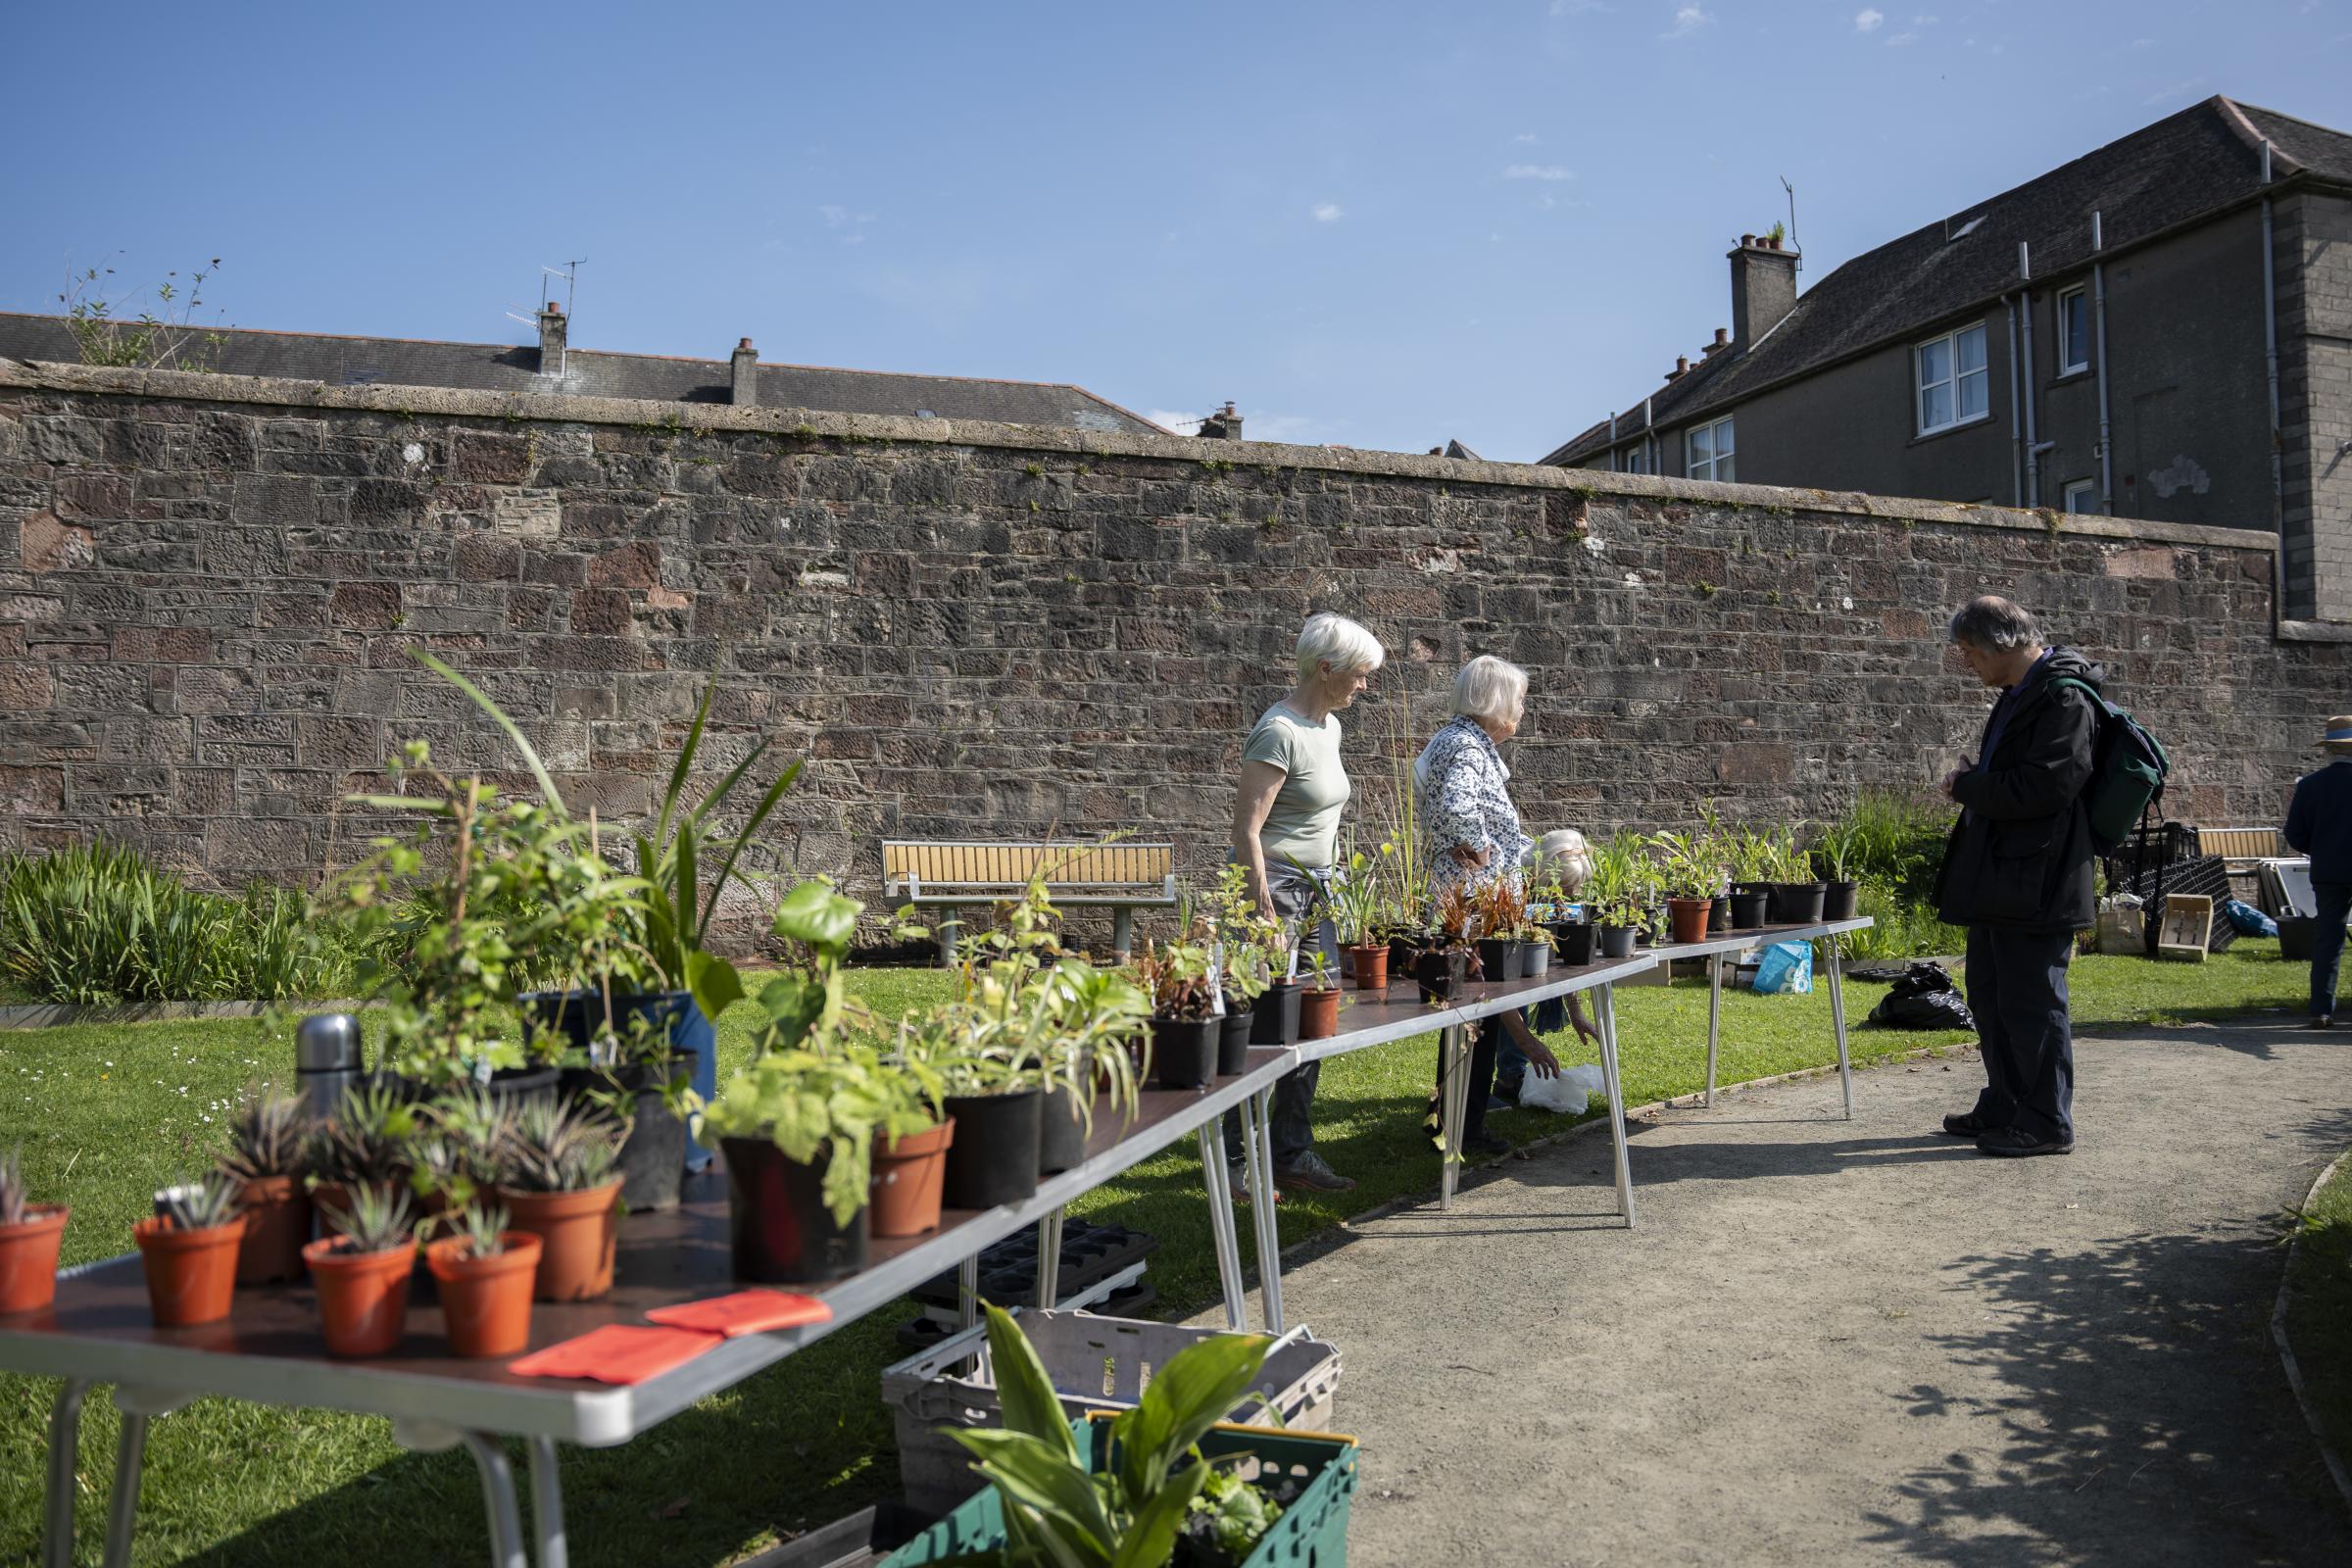 James Street Community Garden hosted a plant sale on May 11 (Photo: Ross Gardner)